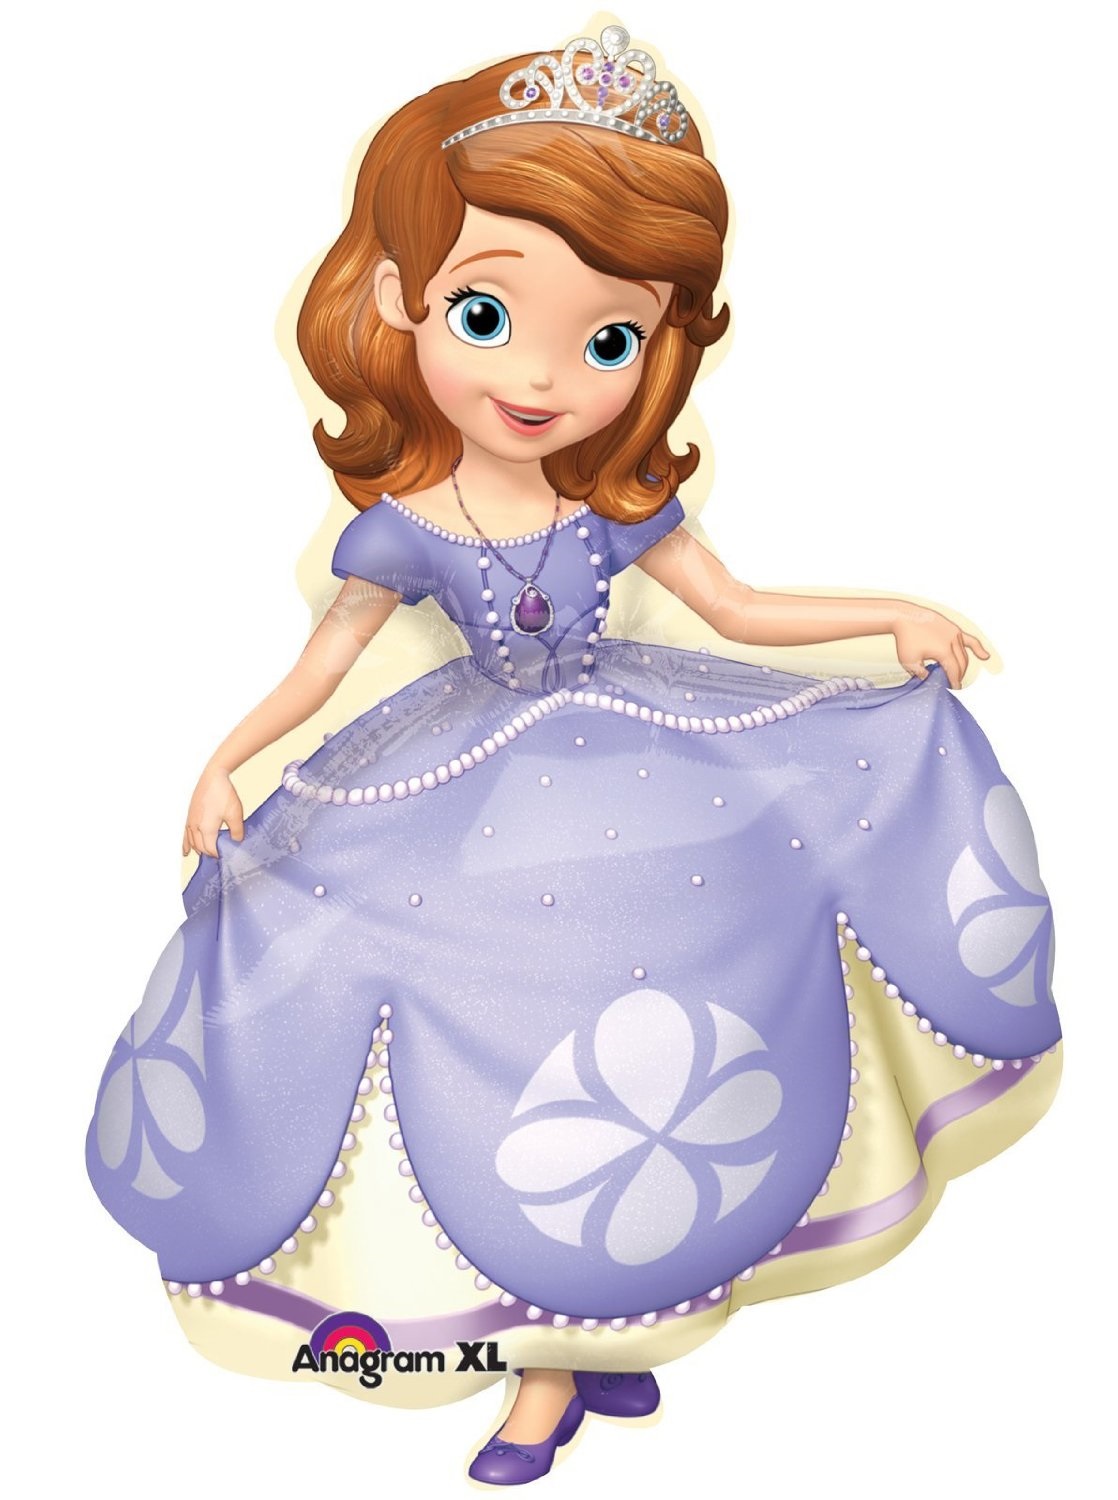 Sofia the First Shaped Balloon, 35" - image 2 of 2